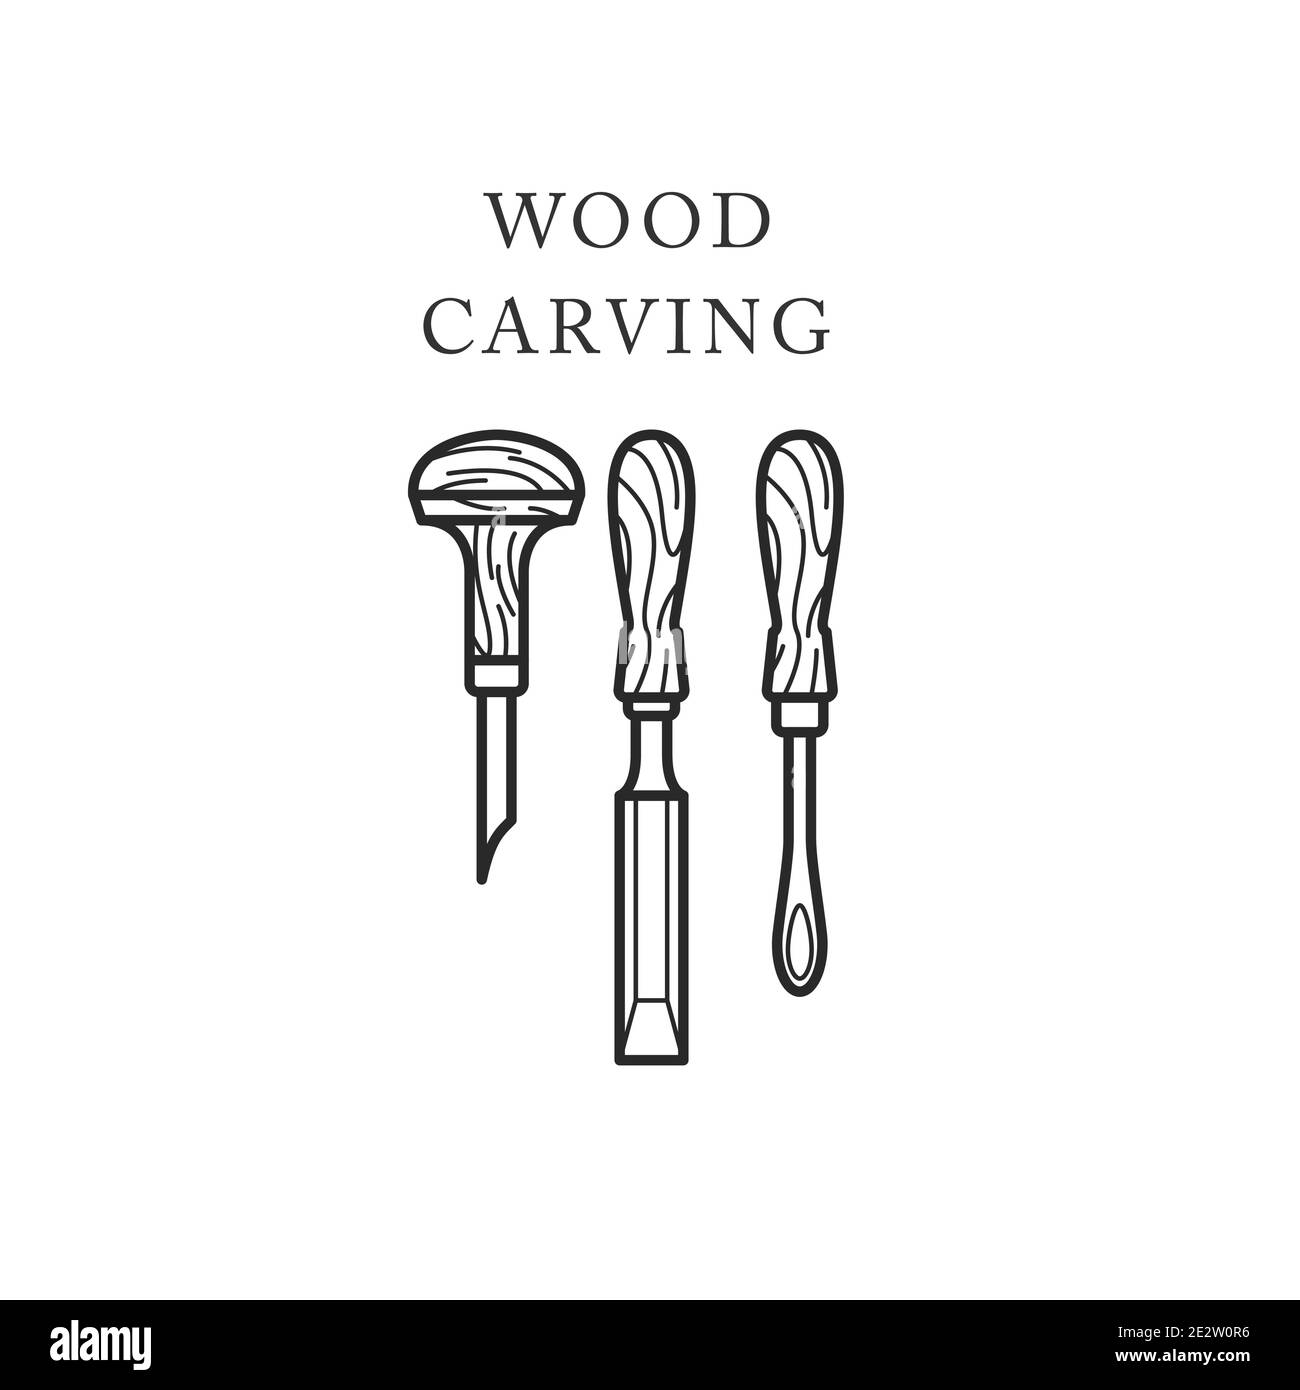 Wood carving tools icon, logo with chisels, timber engraving emblem, vector Stock Vector